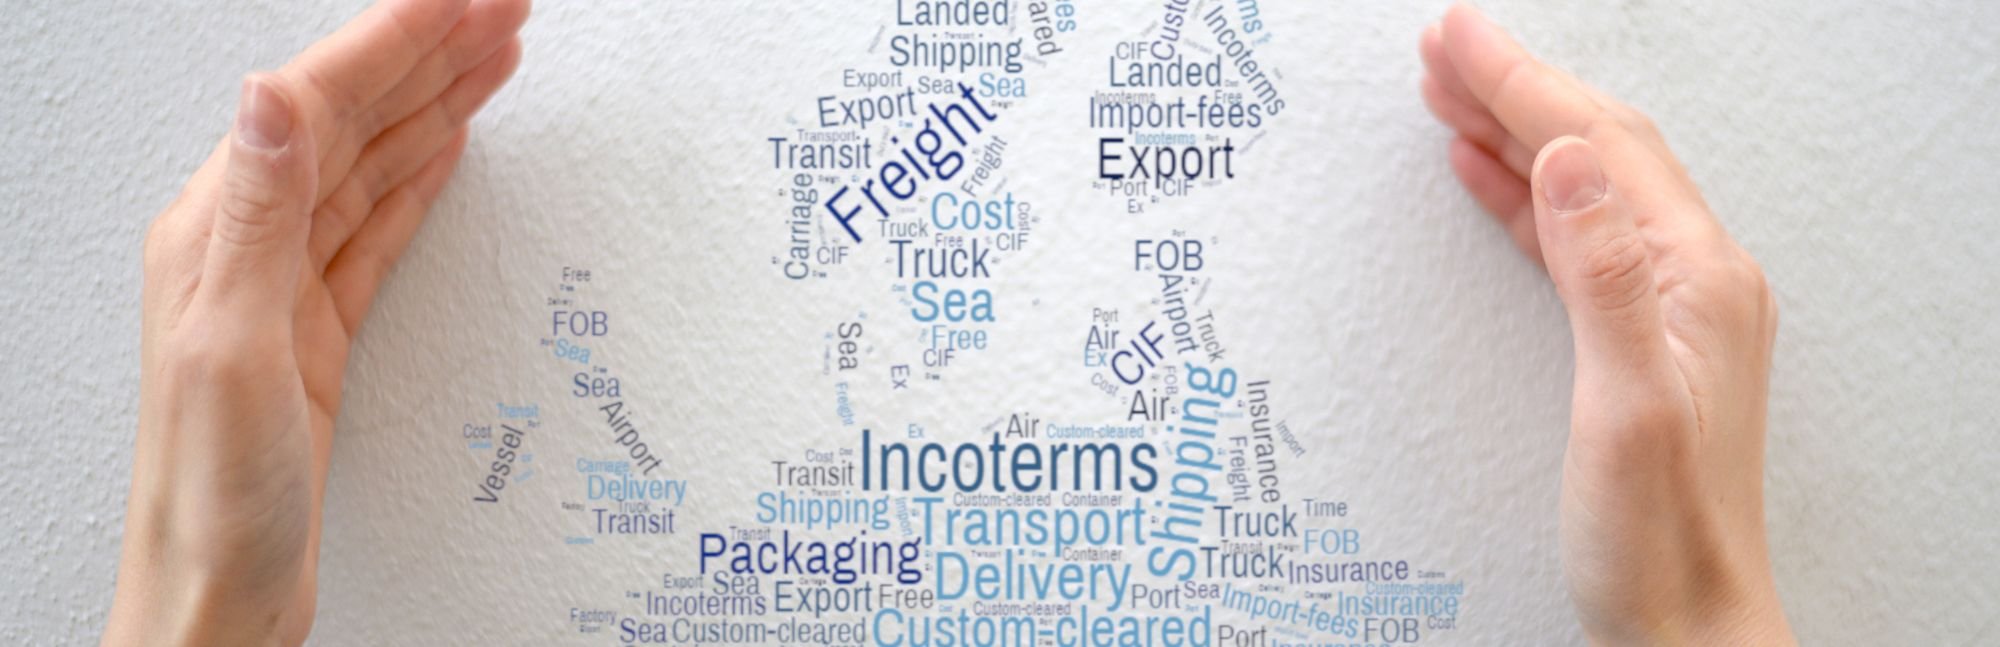 incoterms shipping ecommerce transport trucking us and canada united states 